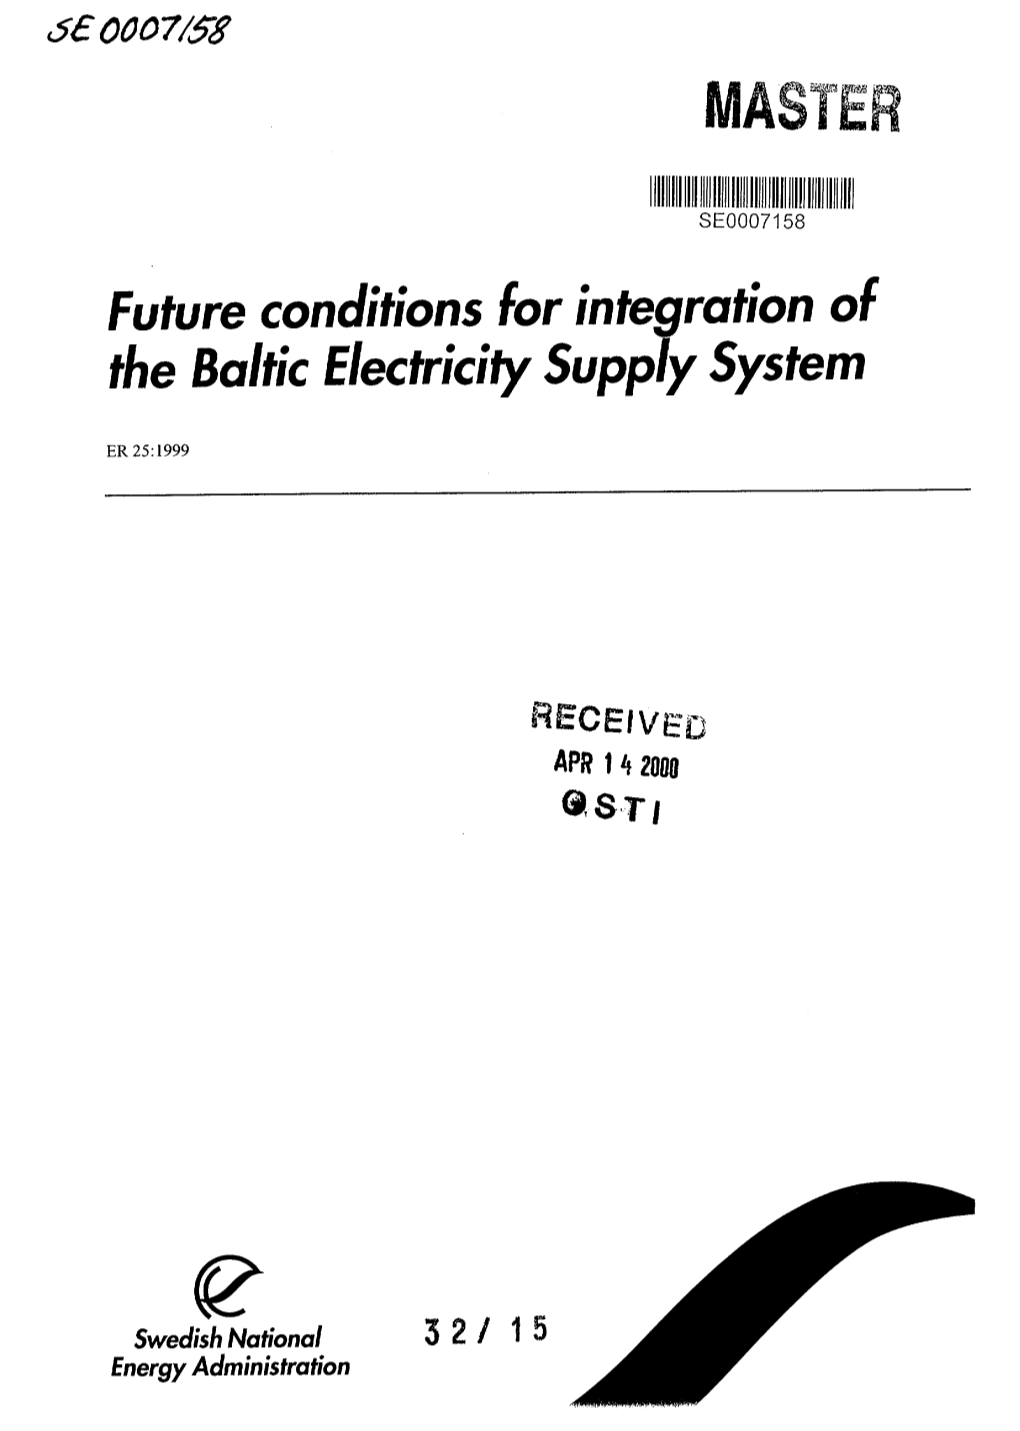 Future Conditions for Integration of the Baltic Electricity Supply System